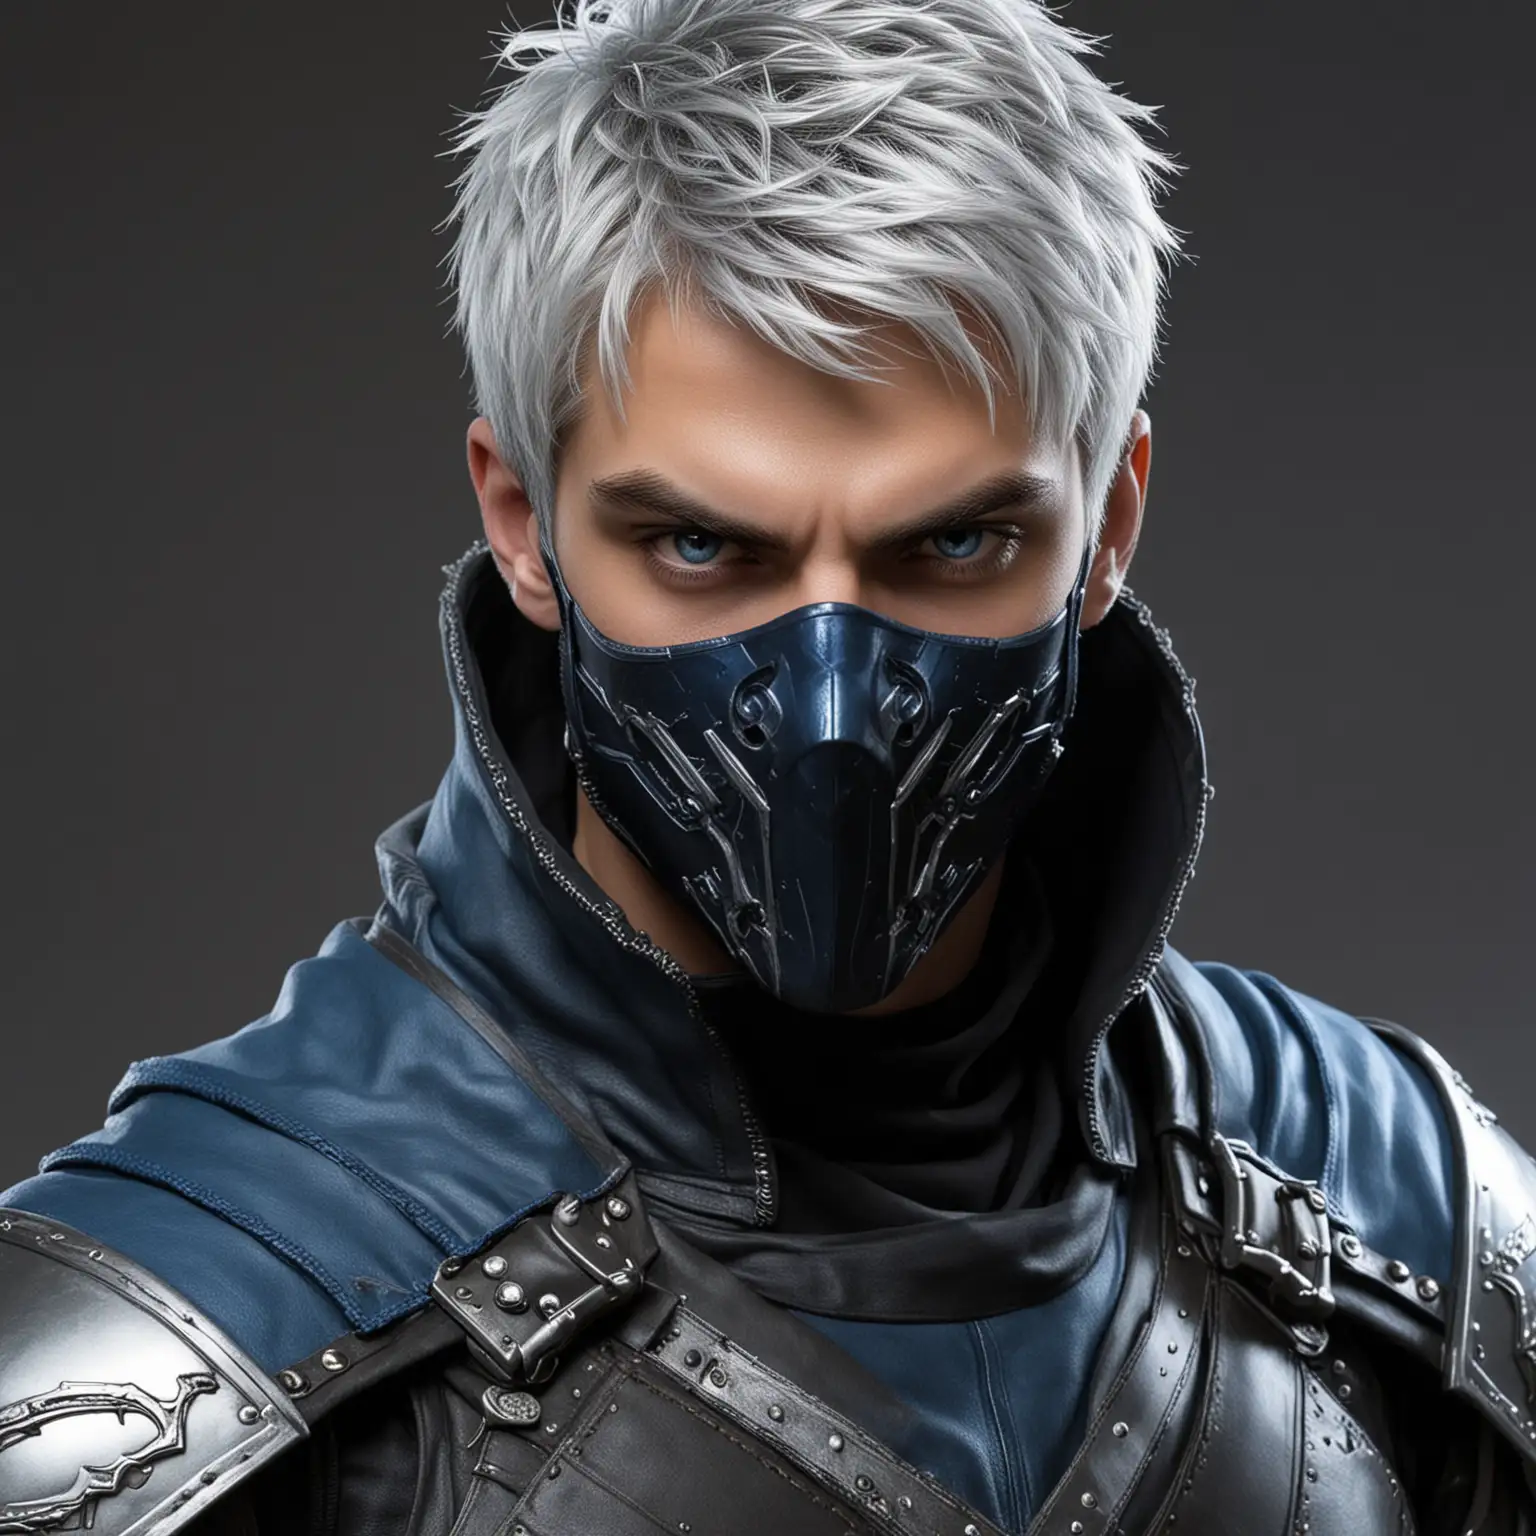 Ruggedly Handsome Fantasy Assassin with Lightning Powers in Black and Blue Armor